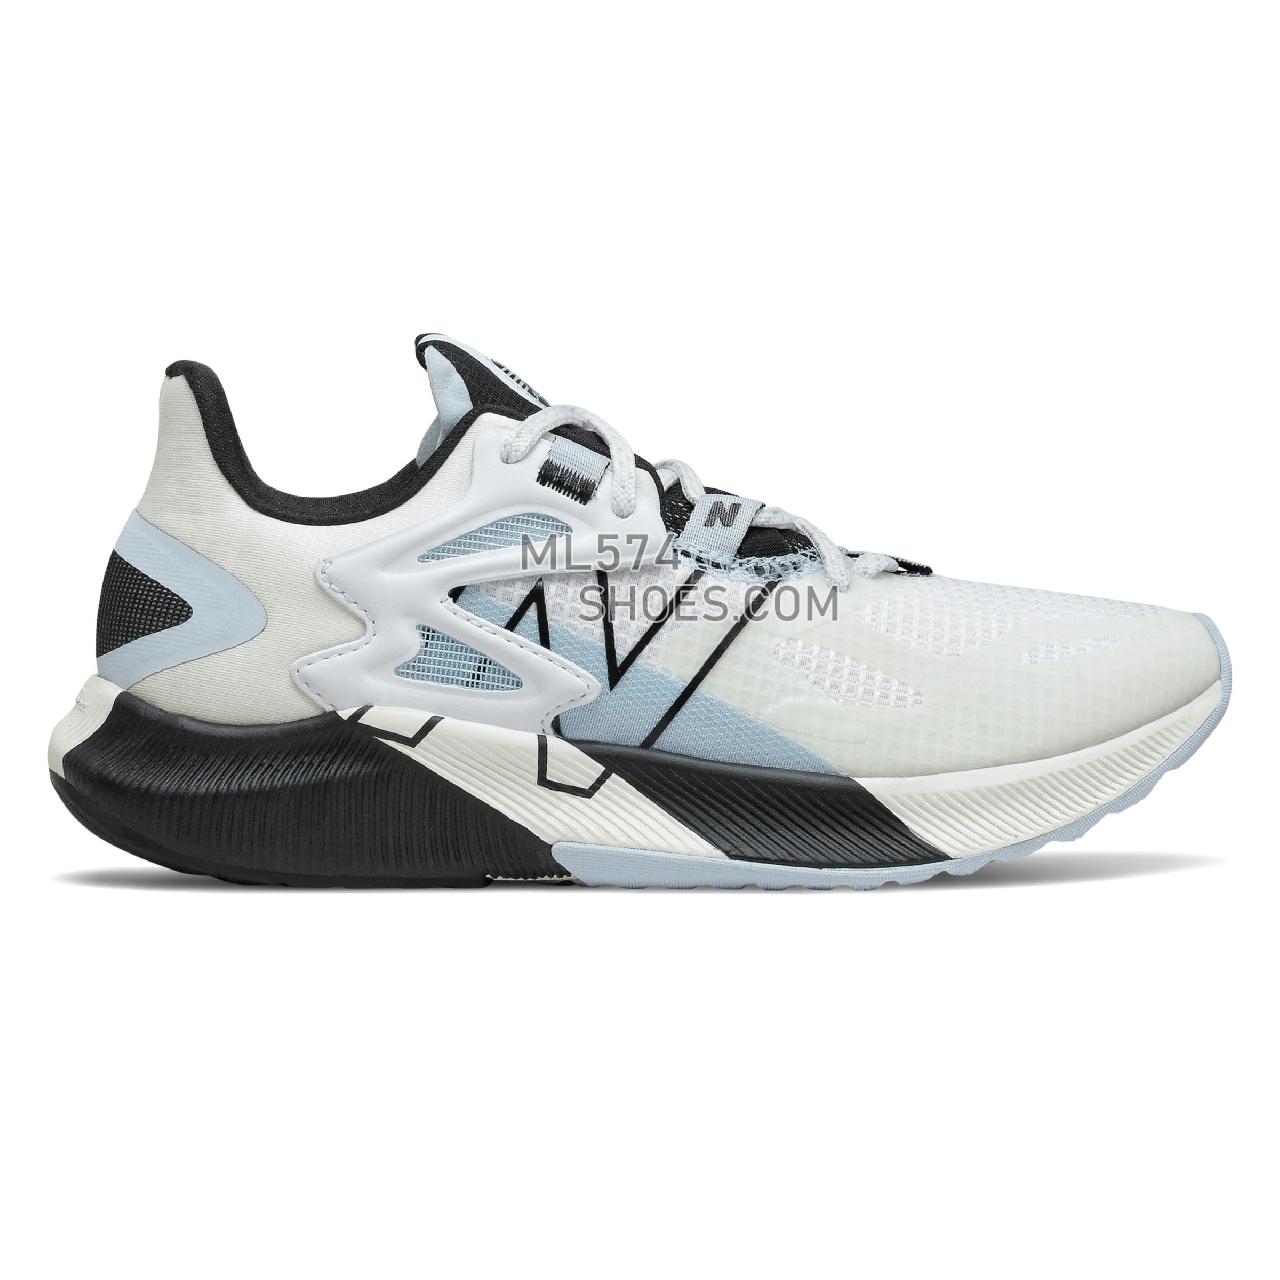 New Balance FuelCell Propel RMX - Women's Neutral Running - White with Uv Glo and Black - WPRMXCW